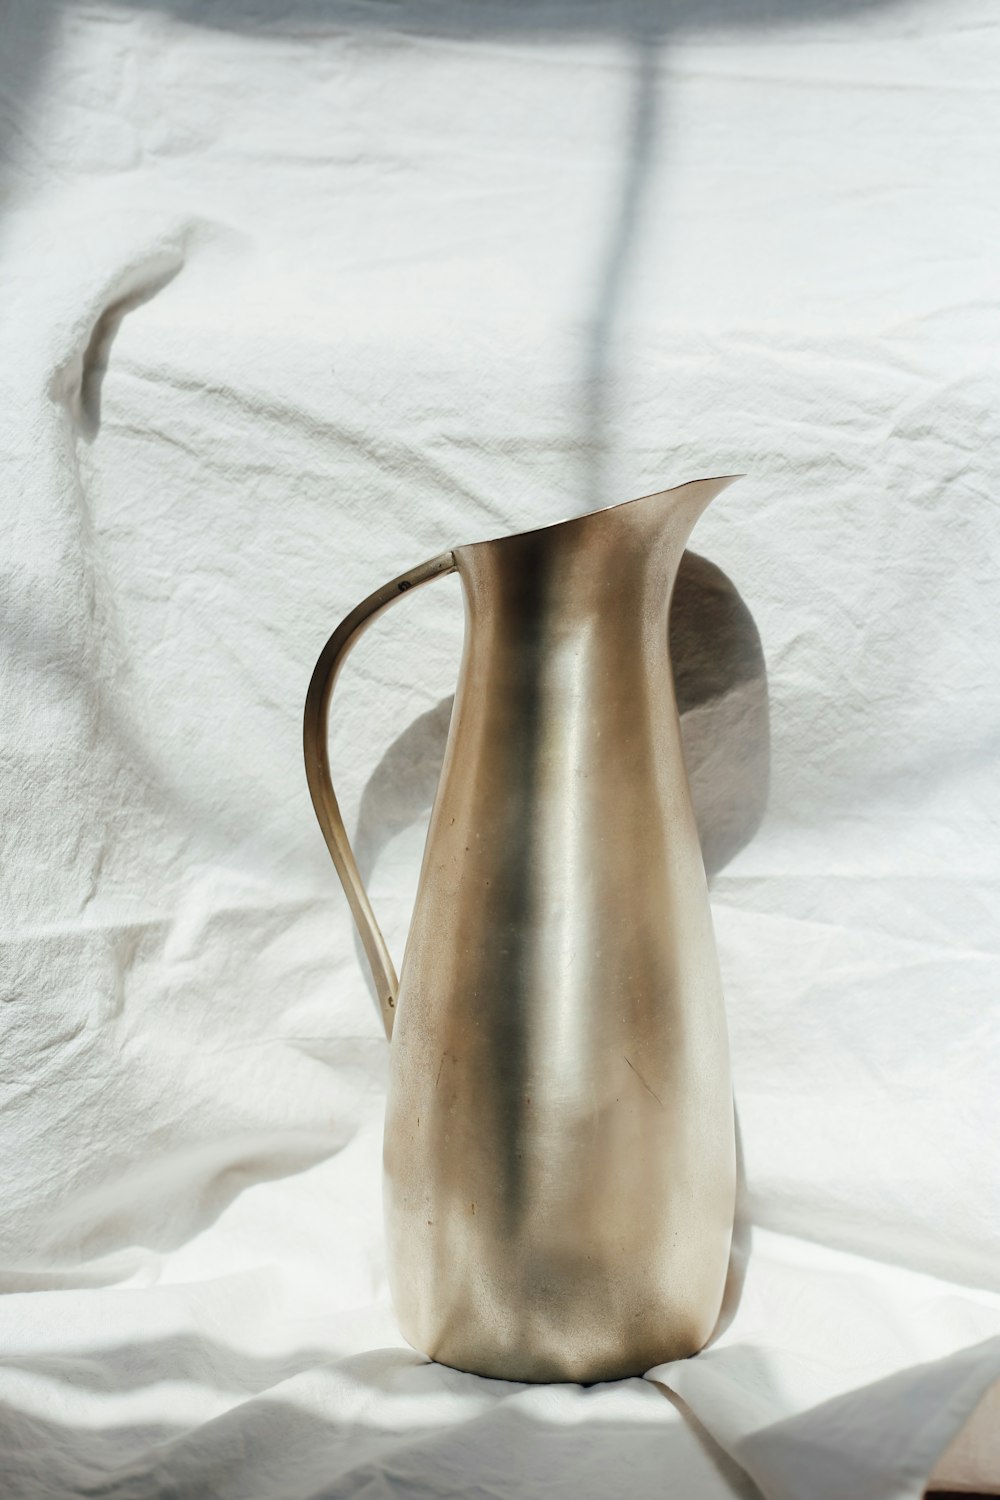 stainless steel pitcher on white textile